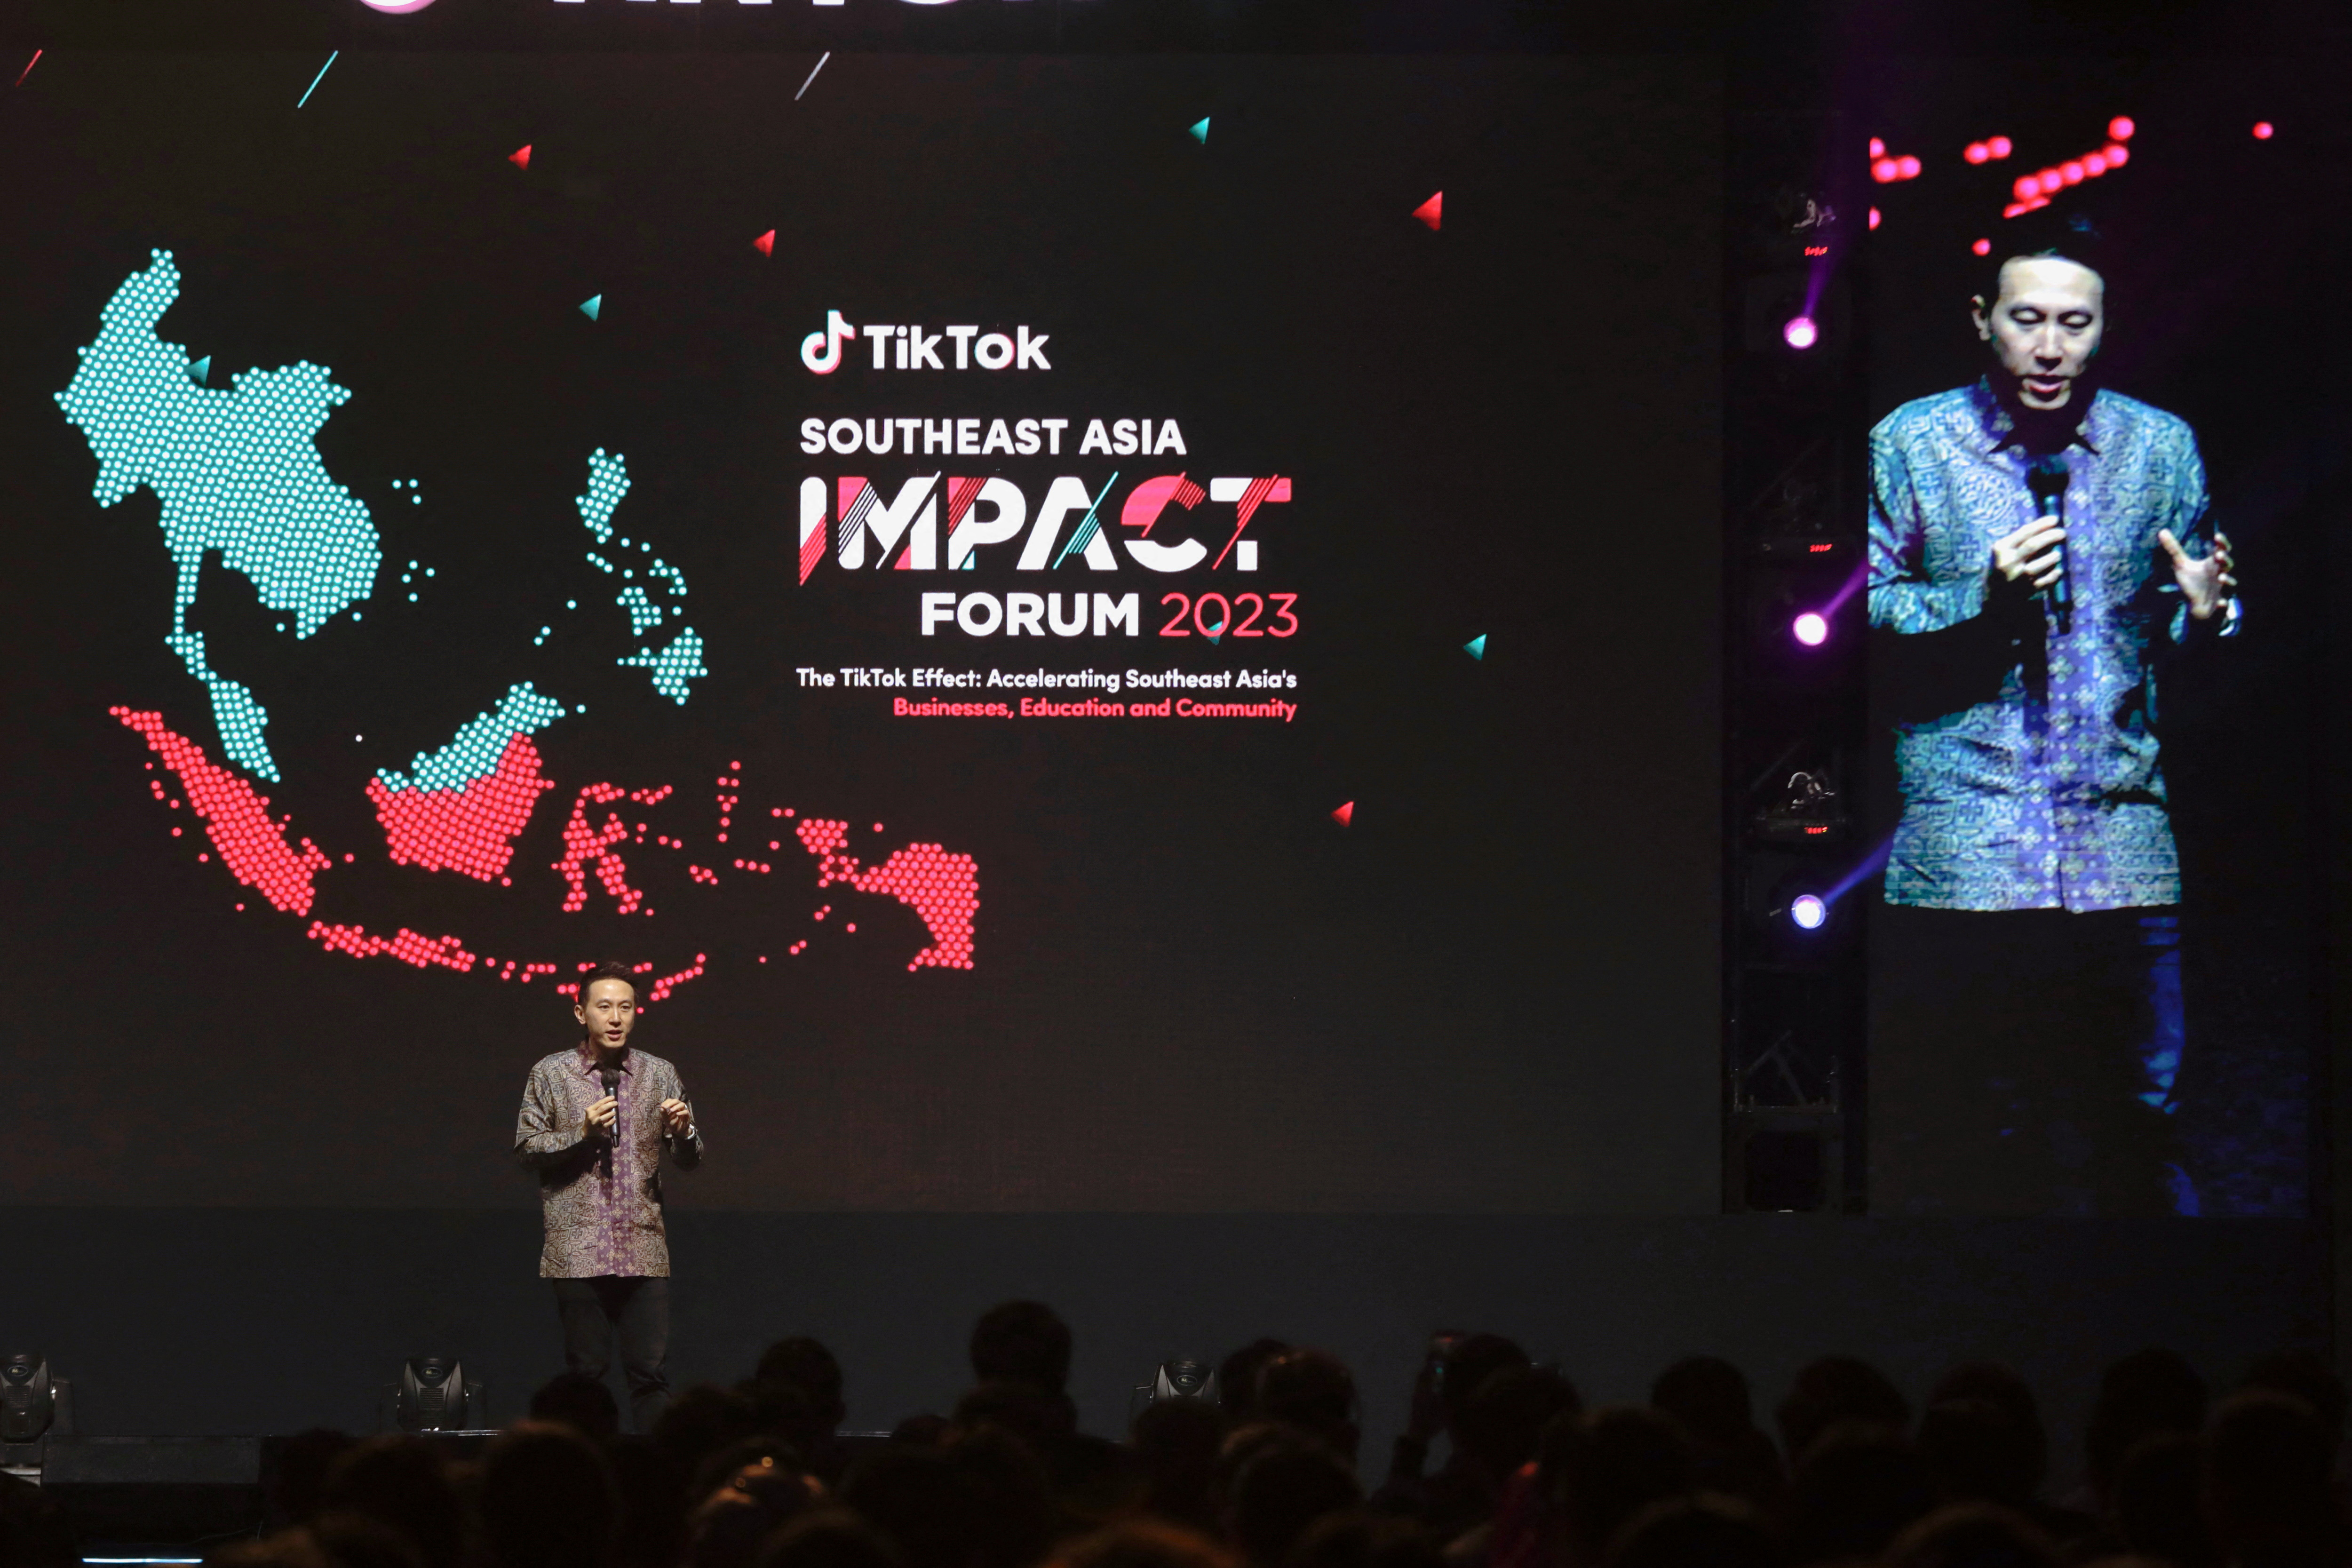 TikTok's rival, Chinese Kwai invests to go 'viral' in Latin America